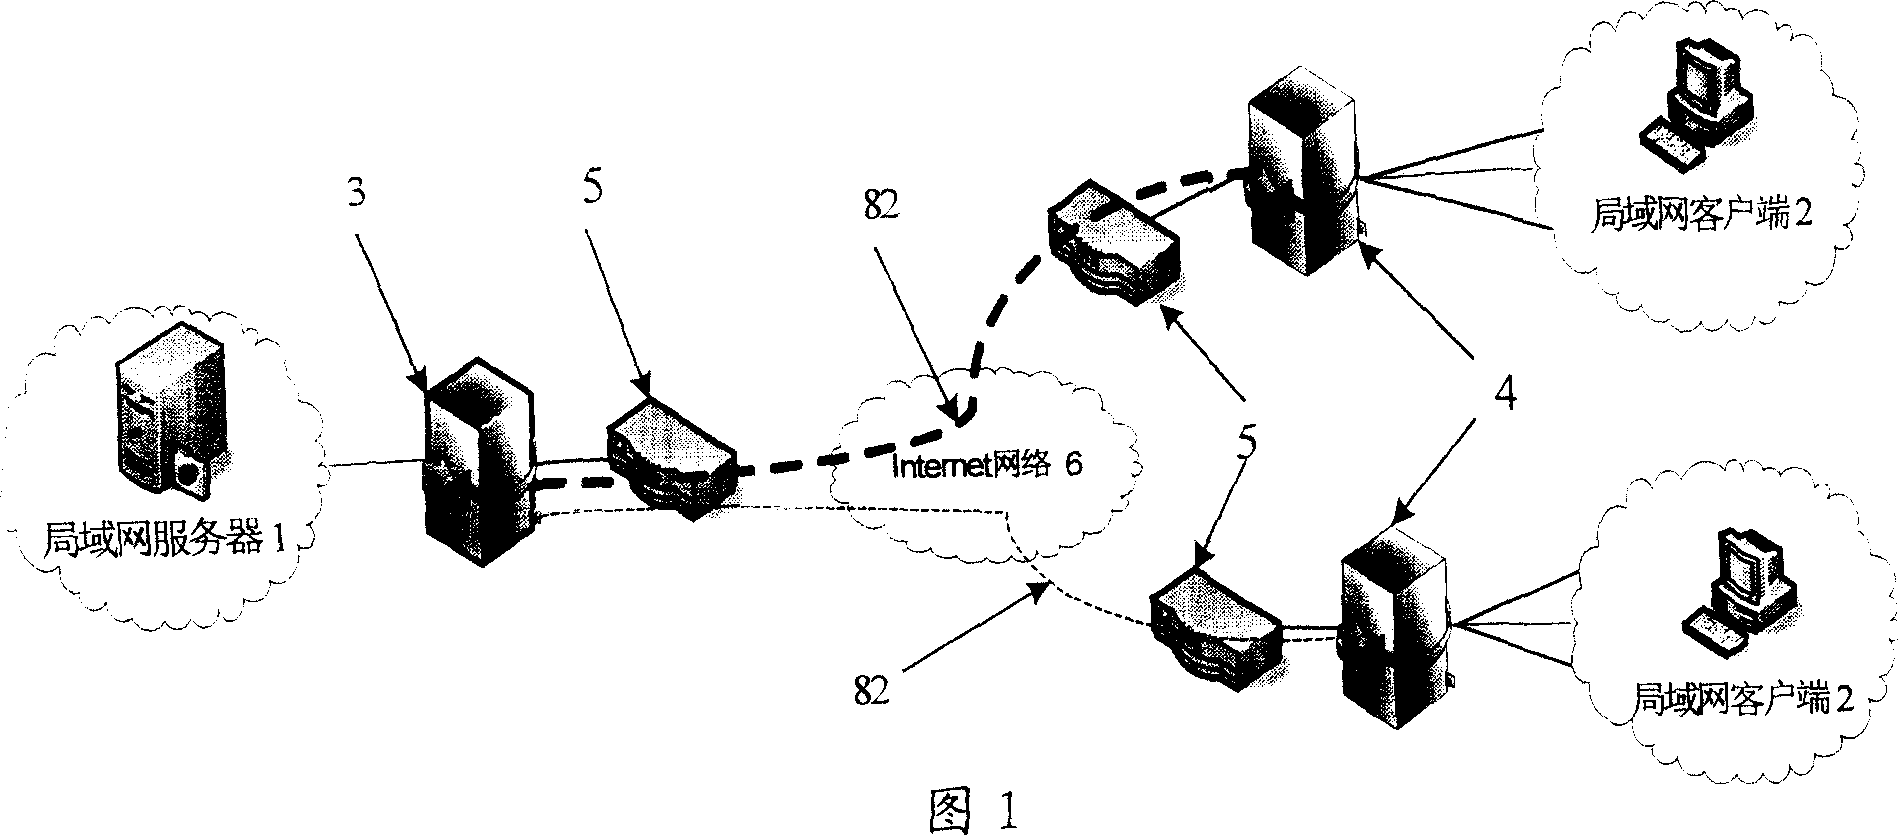 Method for realizing acceleration between networks by using proxy